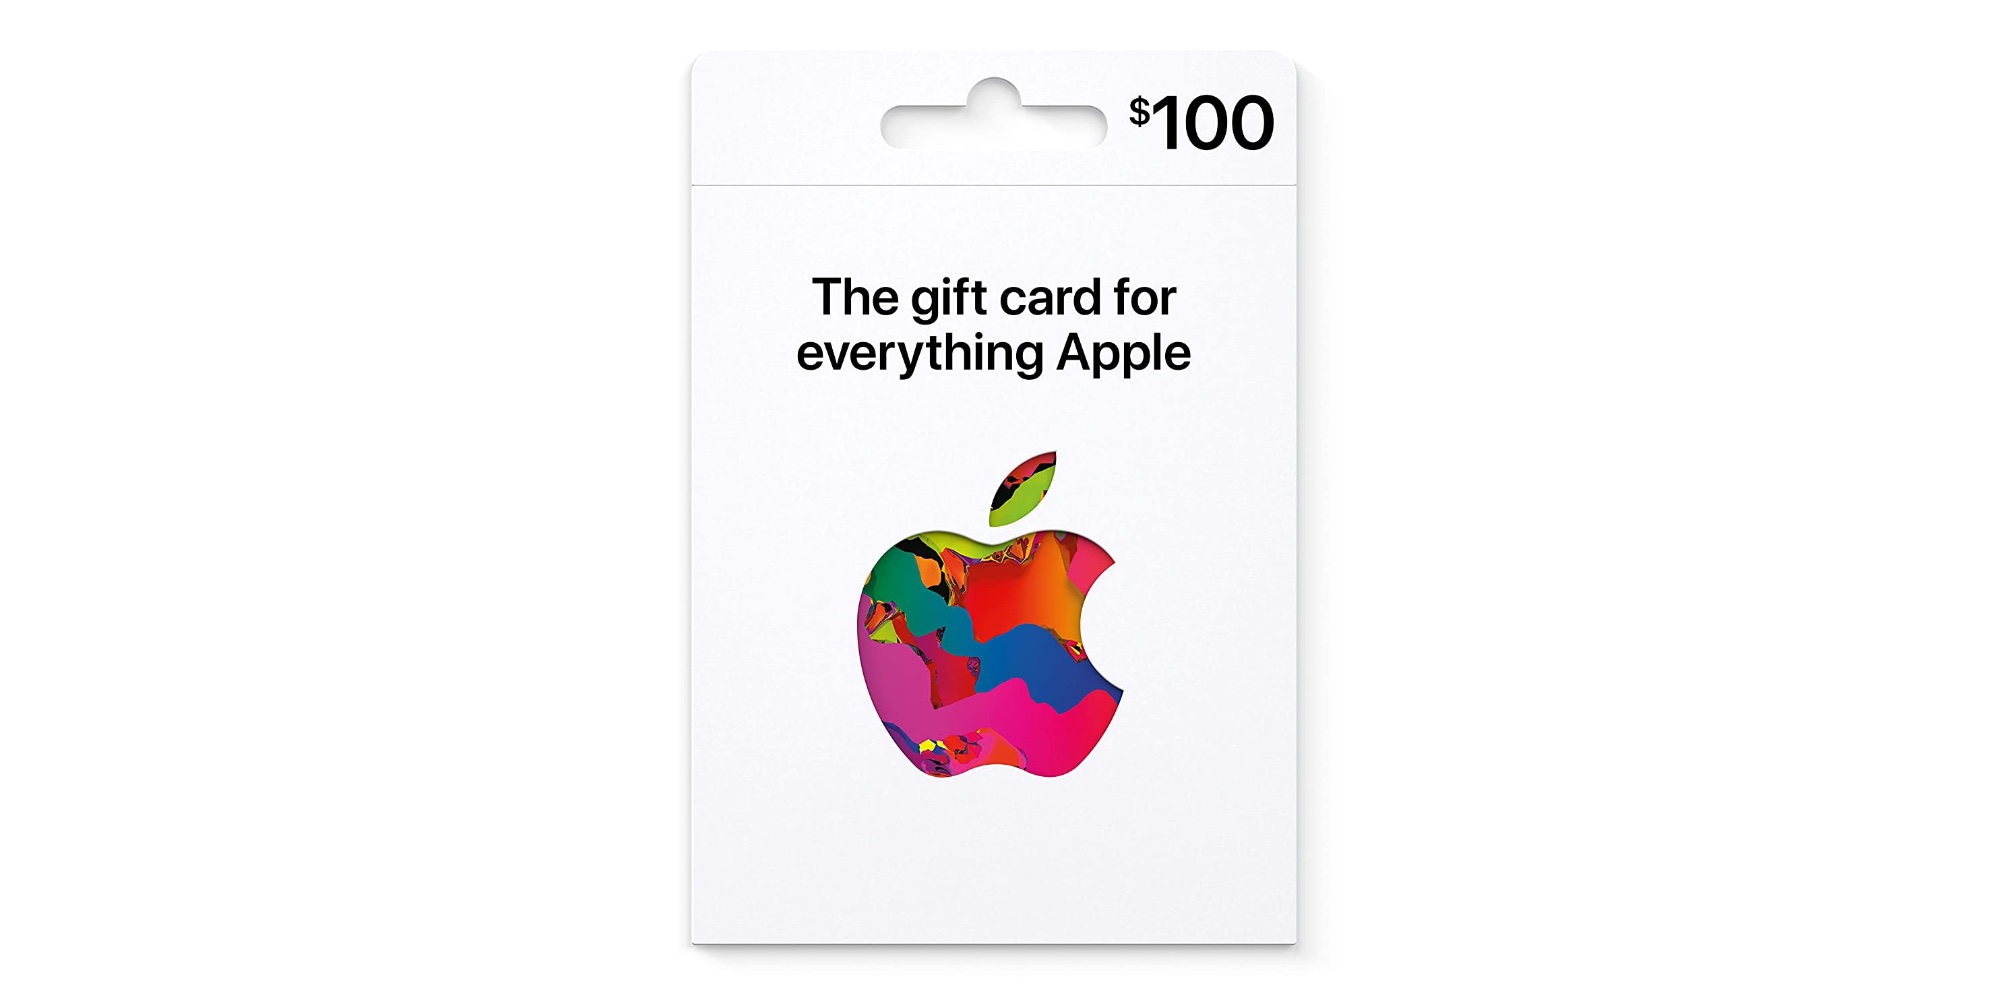 Buy a 100 Apple gift card and score a FREE 10 Target credit